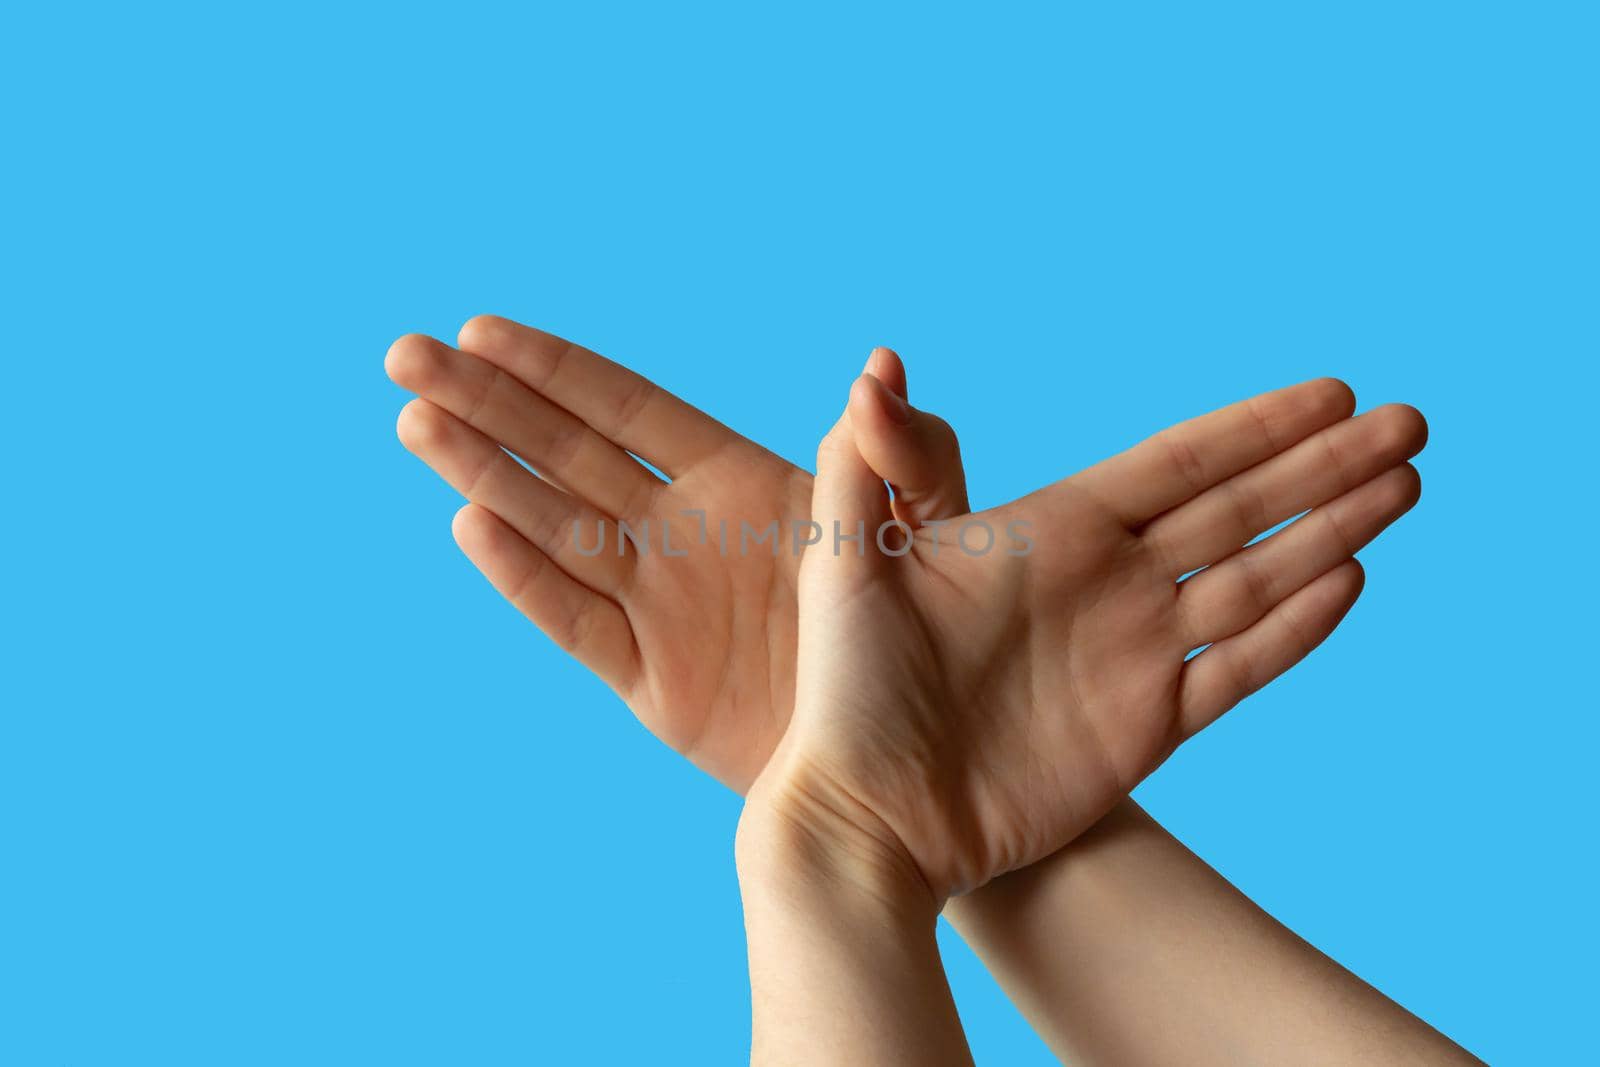 Silhouette of a hand gesture similar to a bird flying on a blue background by lapushka62